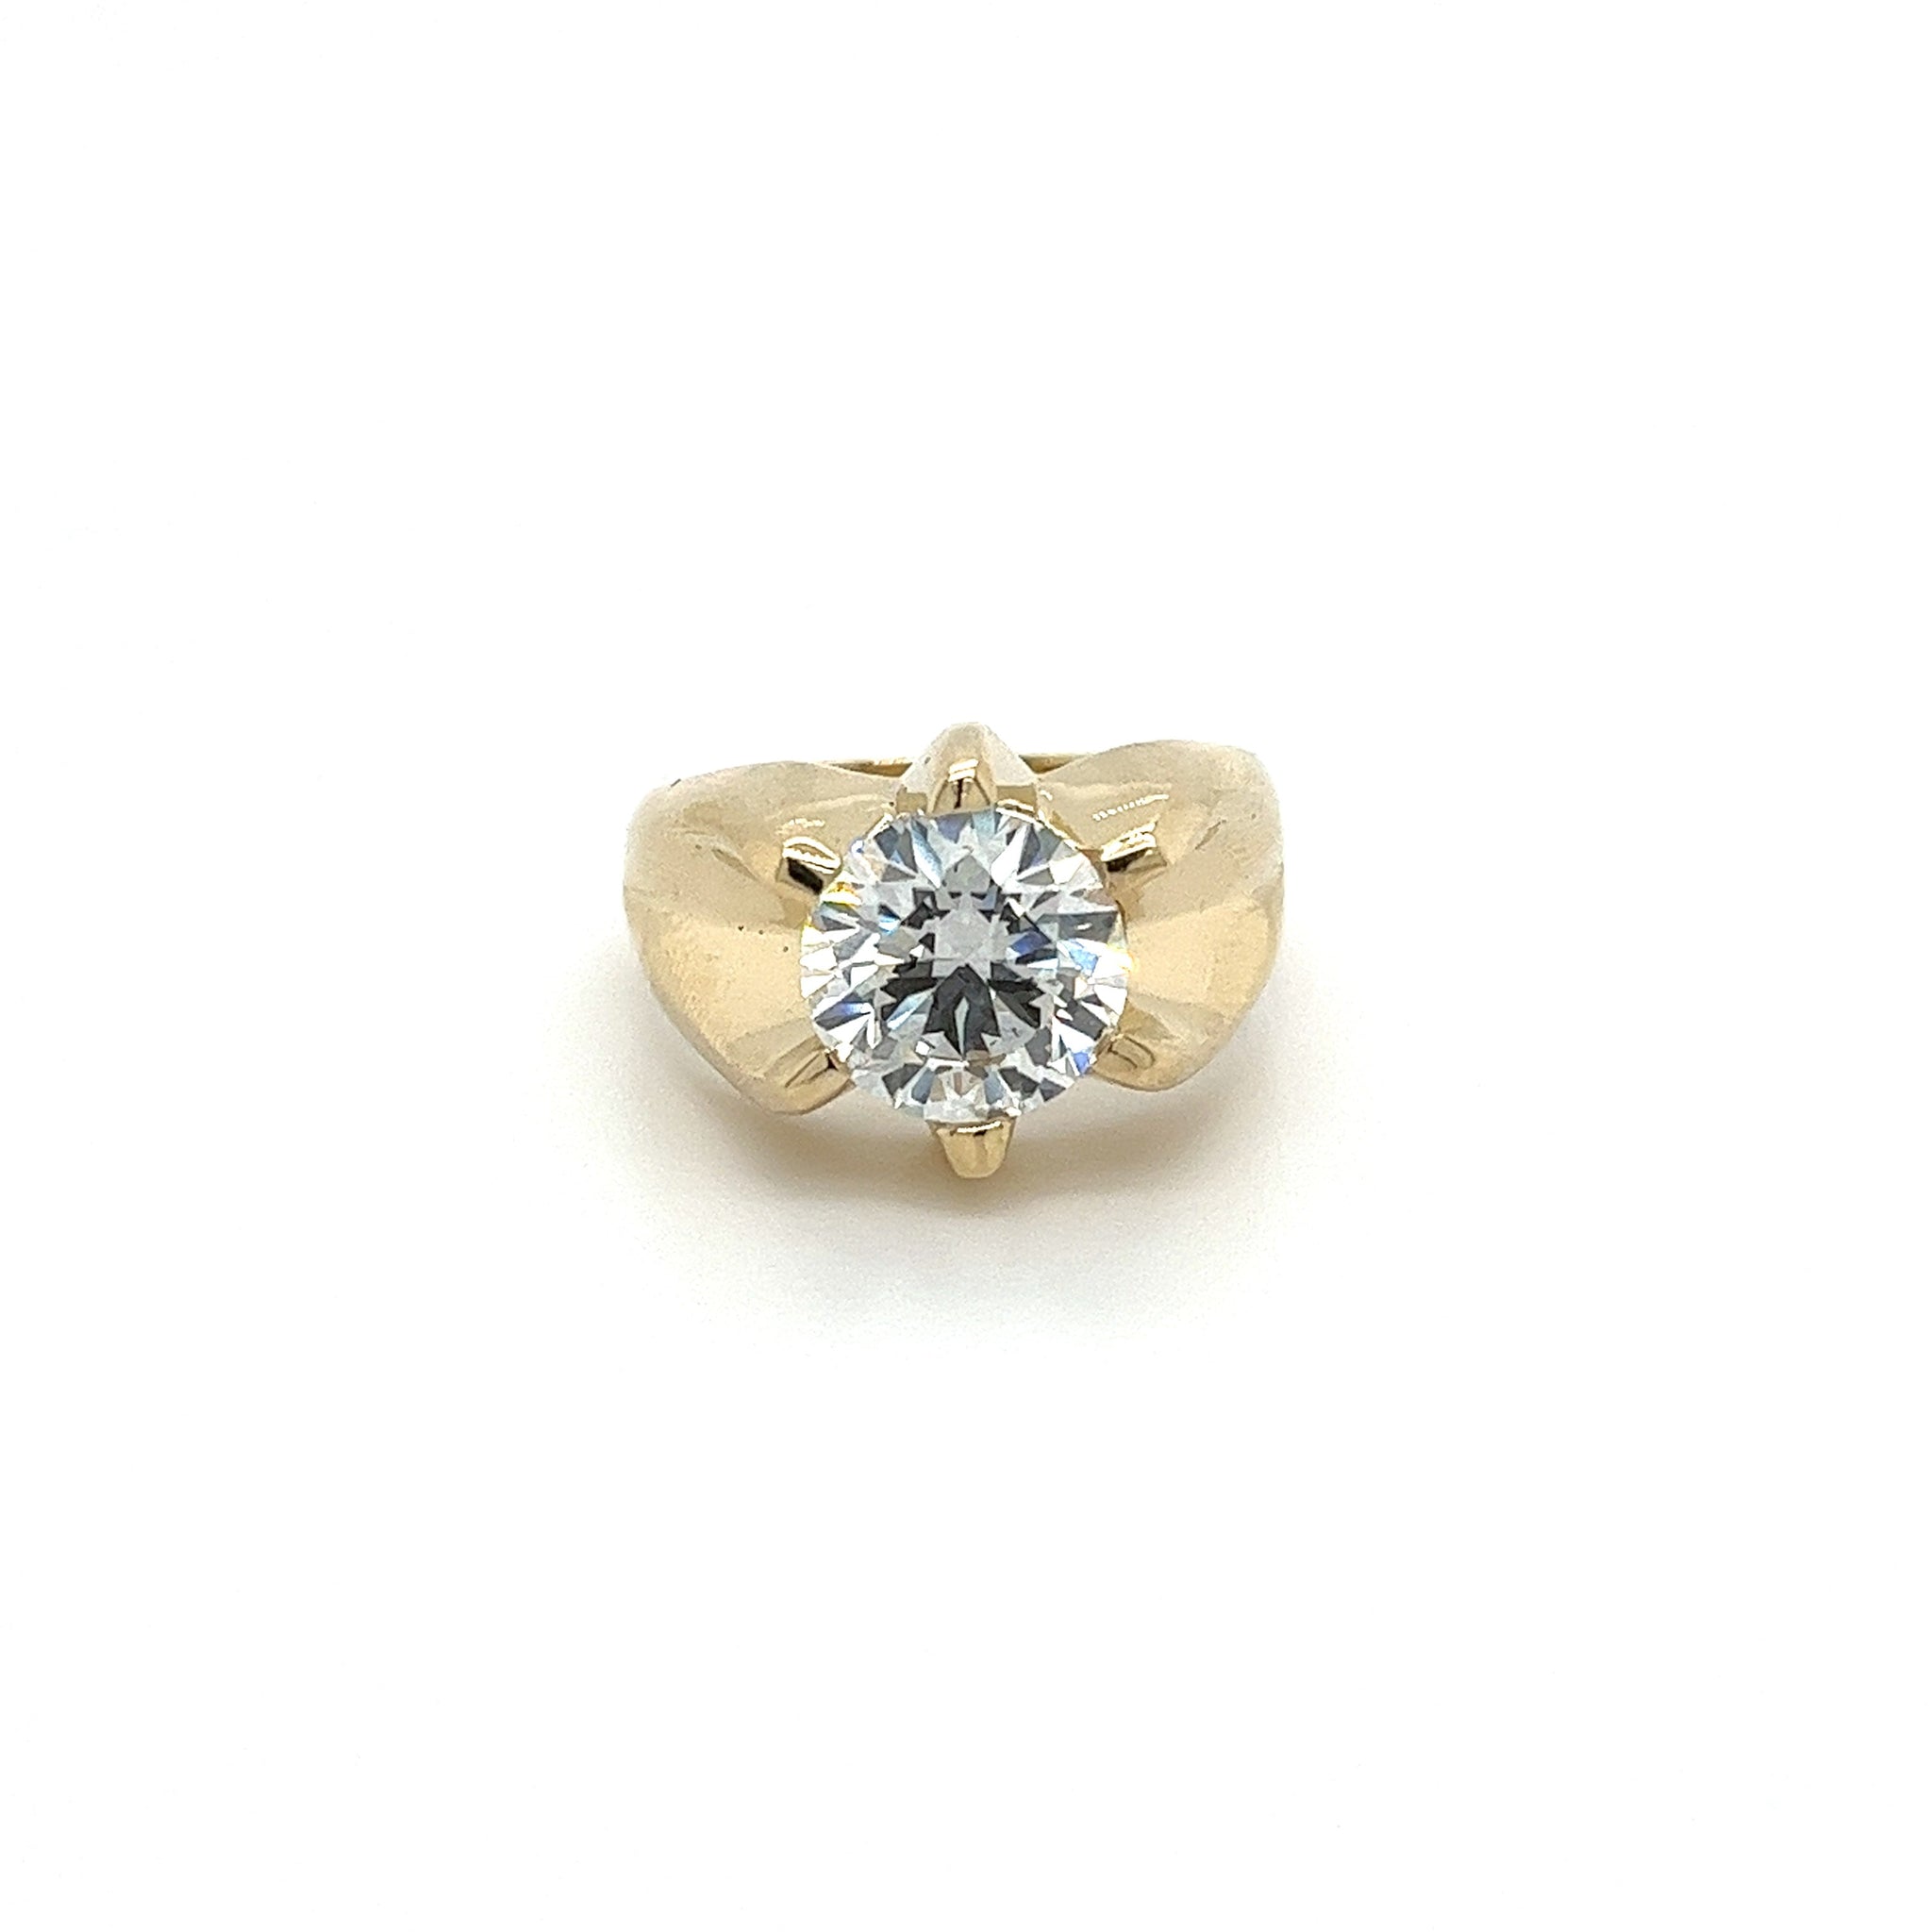 3.5 Carat Round Cut Lab Grown Diamond Mens Solitaire Ring in 14K Yellow Gold